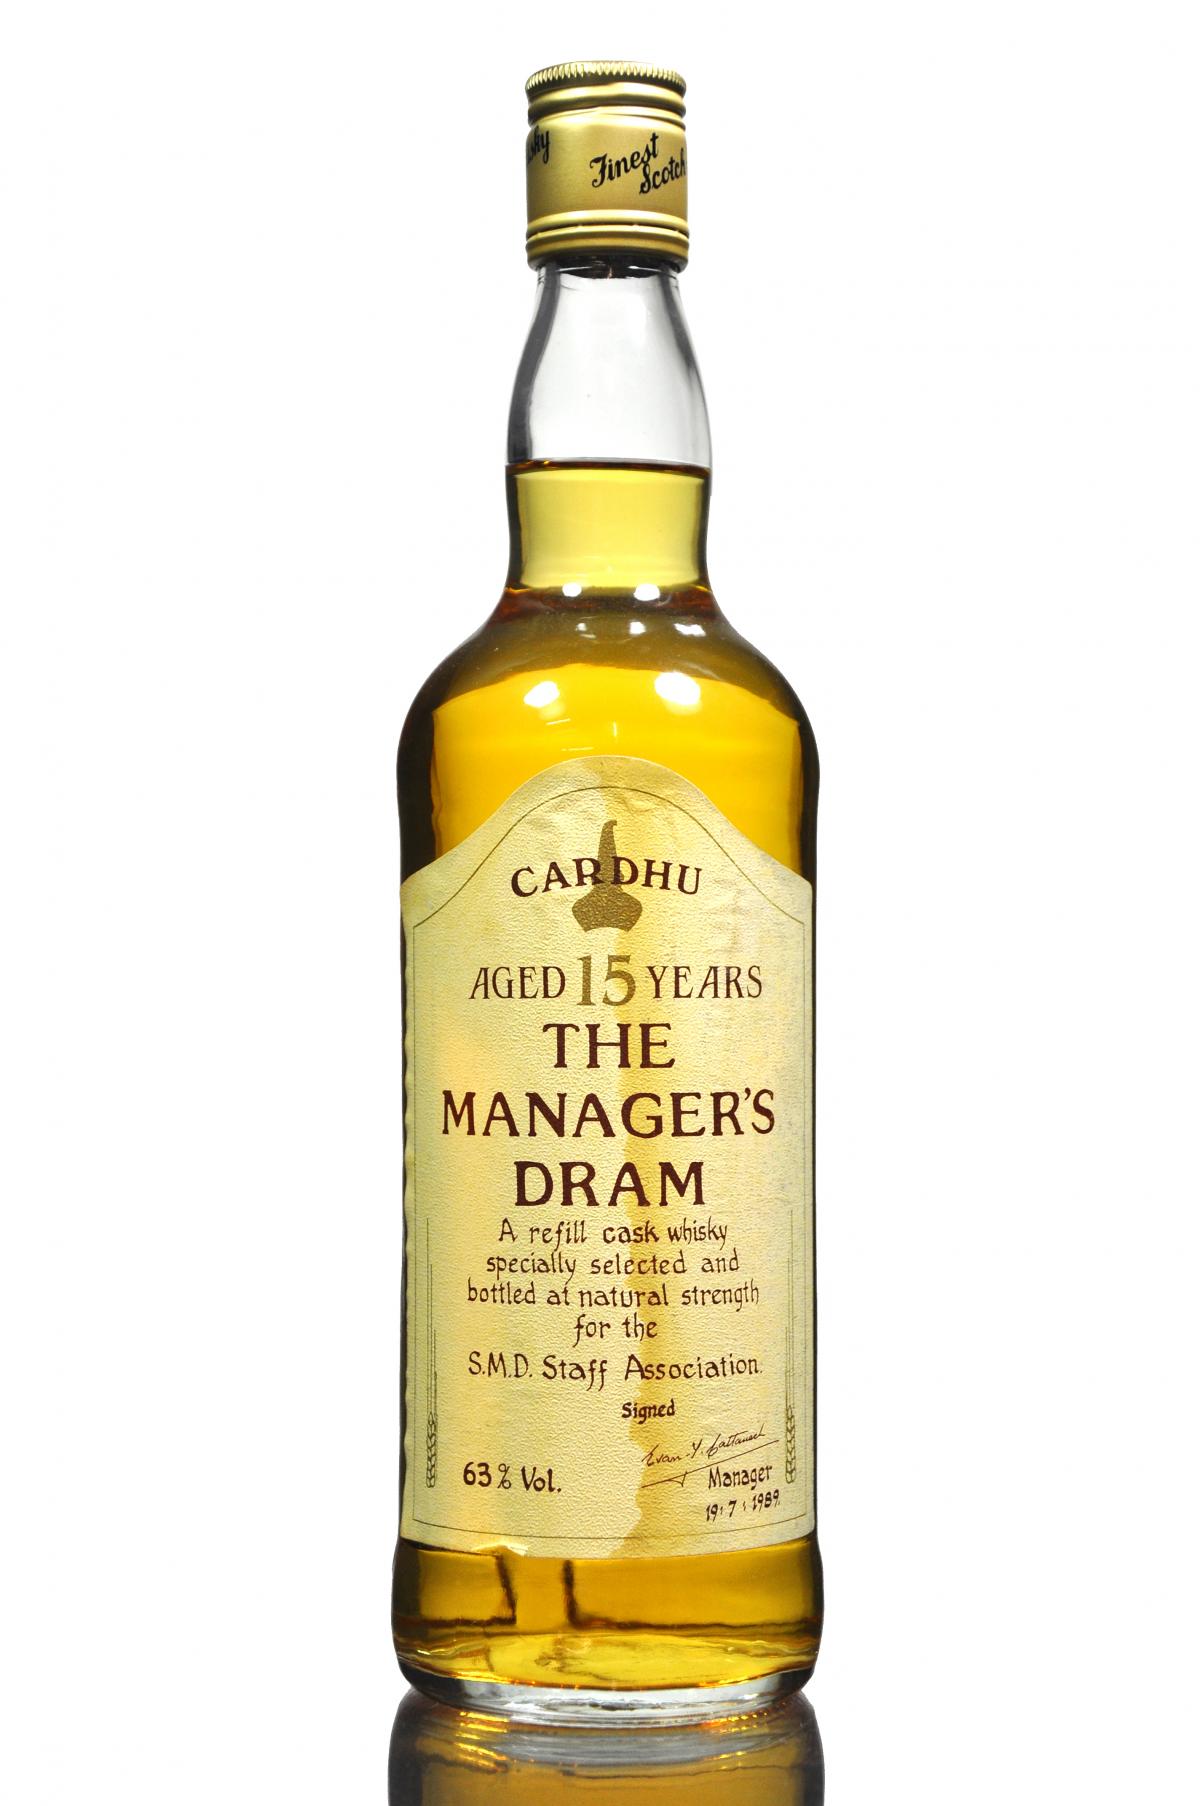 Cardhu 15 Year Old - Managers Dram 1989